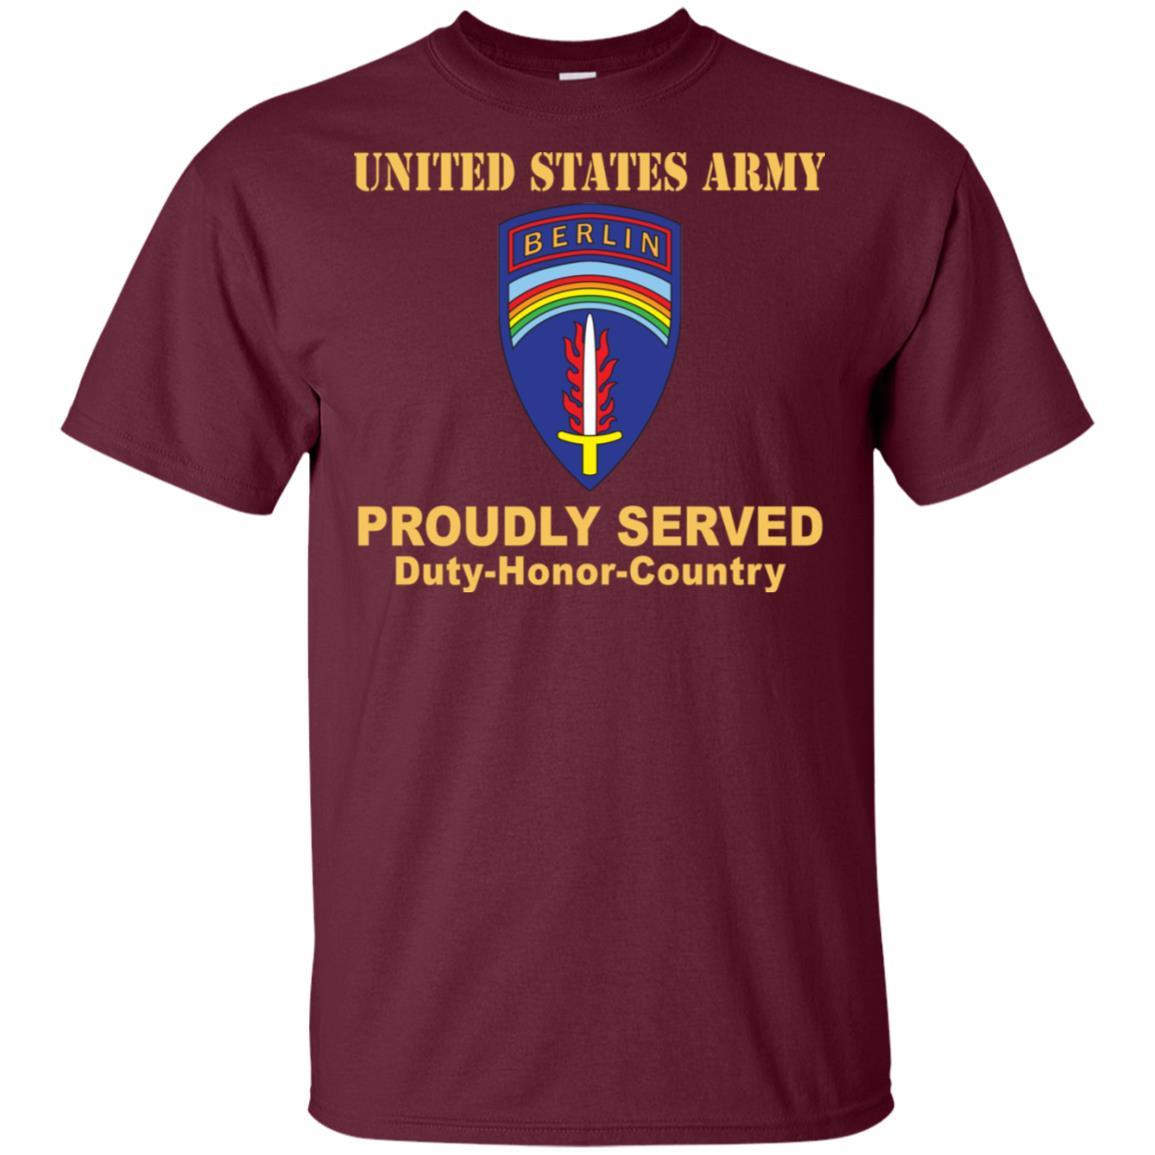 US ARMY BERLIN COMMAND- Proudly Served T-Shirt On Front For Men-TShirt-Army-Veterans Nation